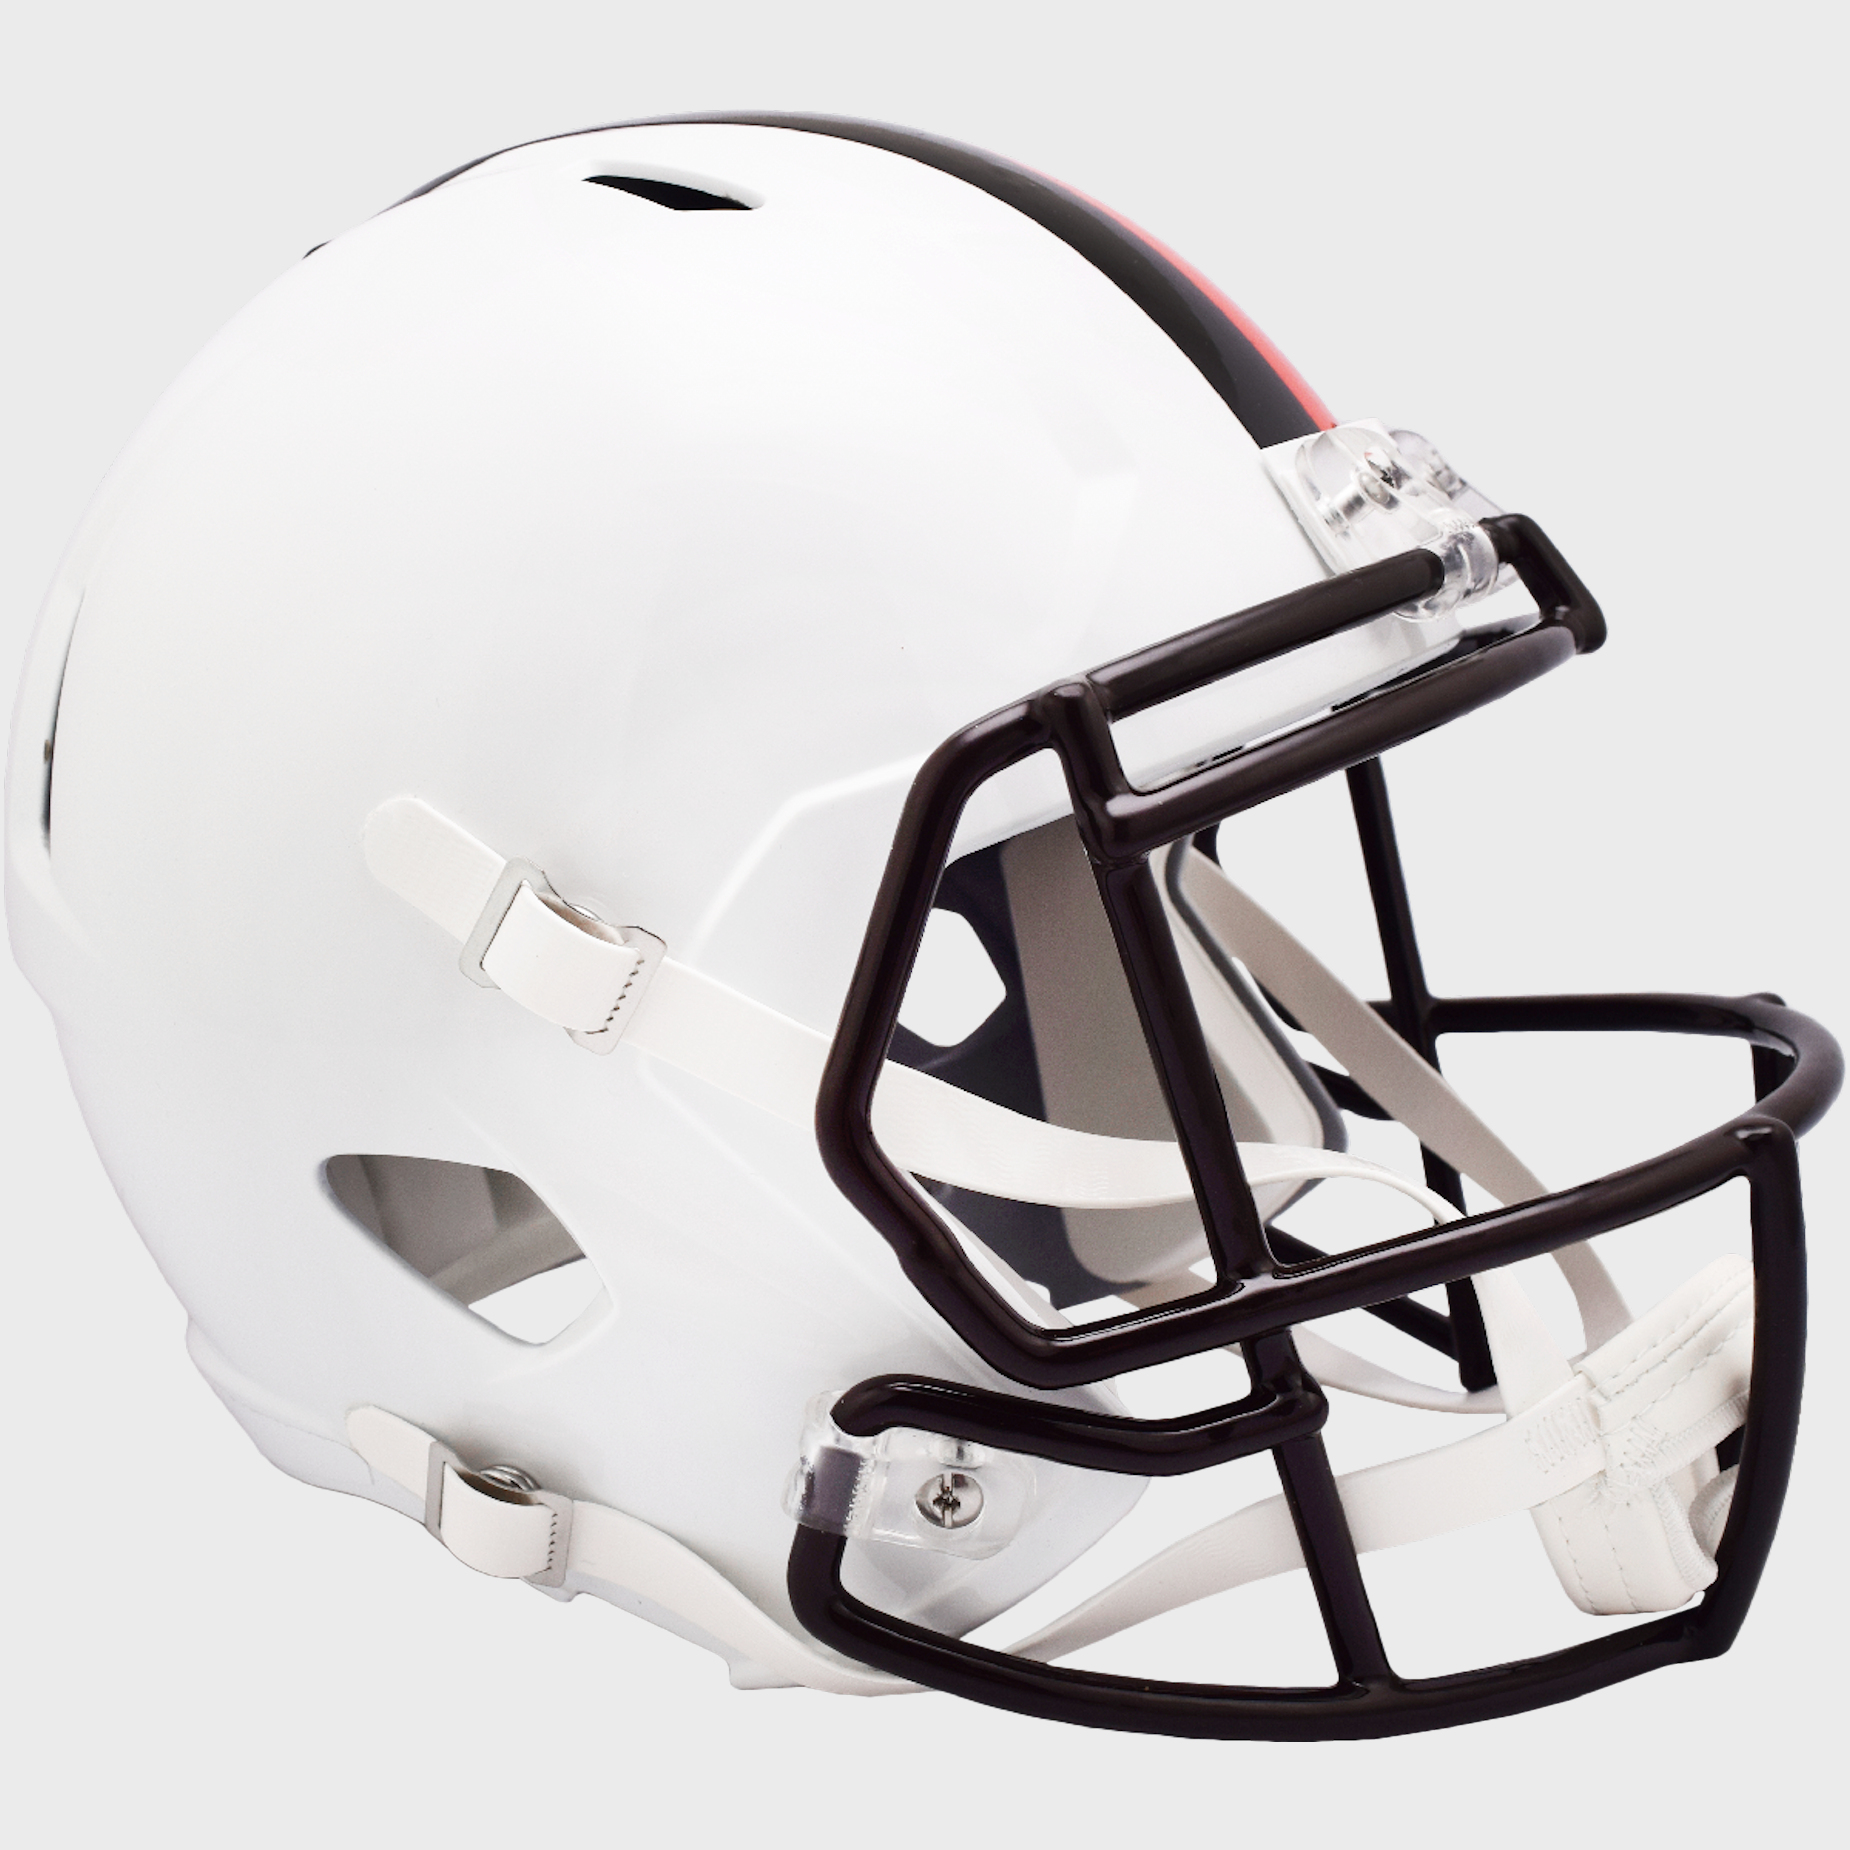 Cleveland Browns full size White Out replica helmet